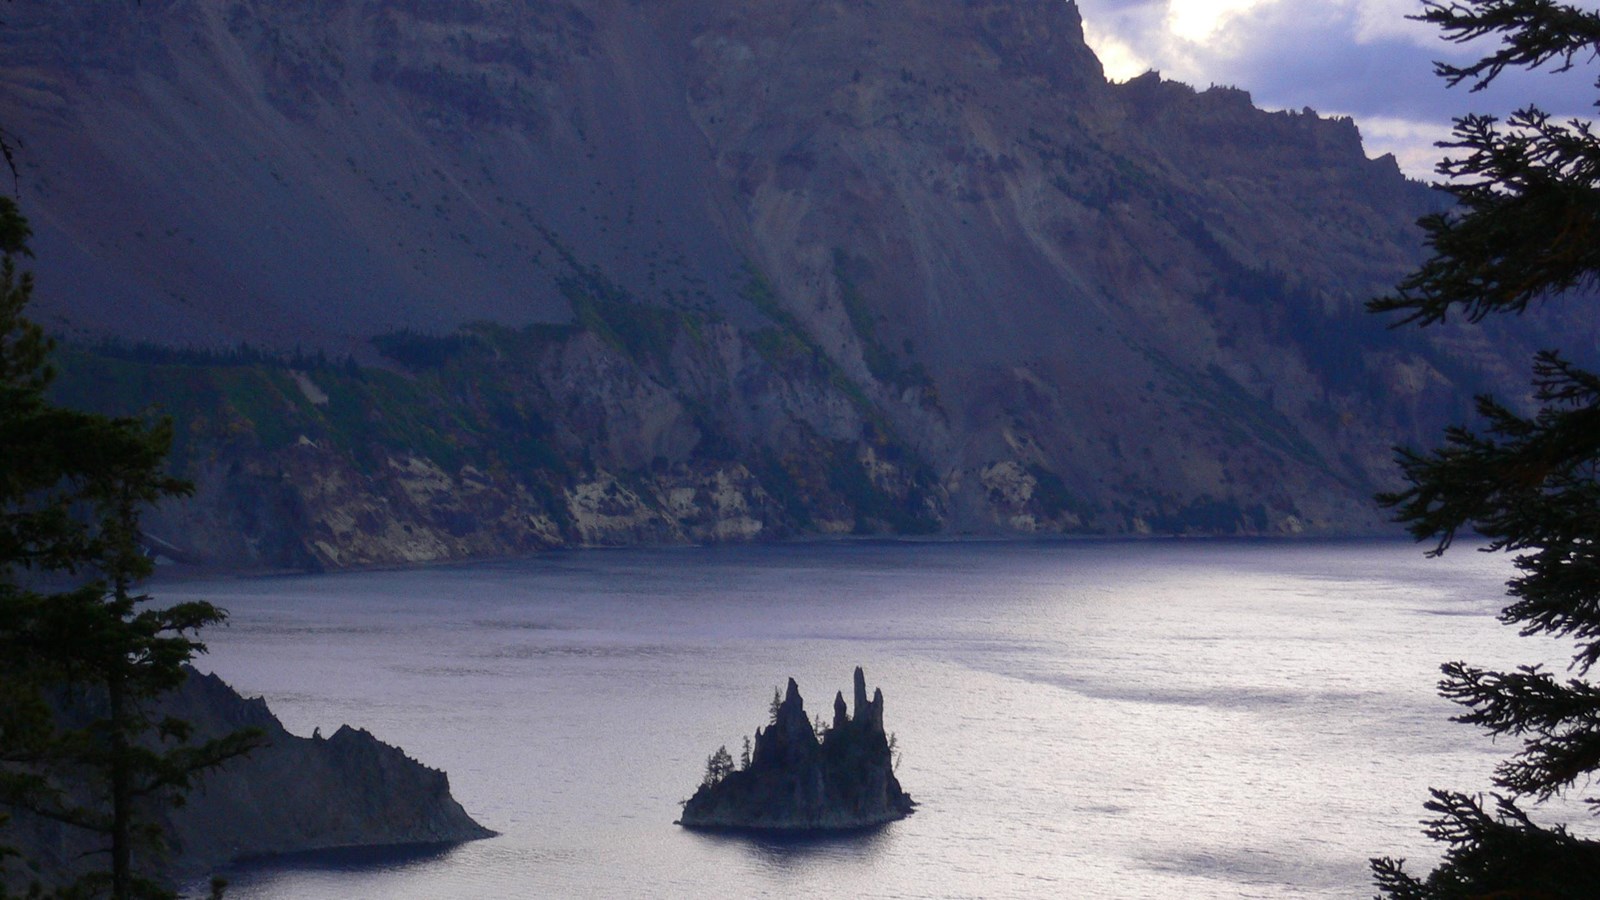 View of the Phantom Ship at sunset, one of two islands in Crater Lake.  